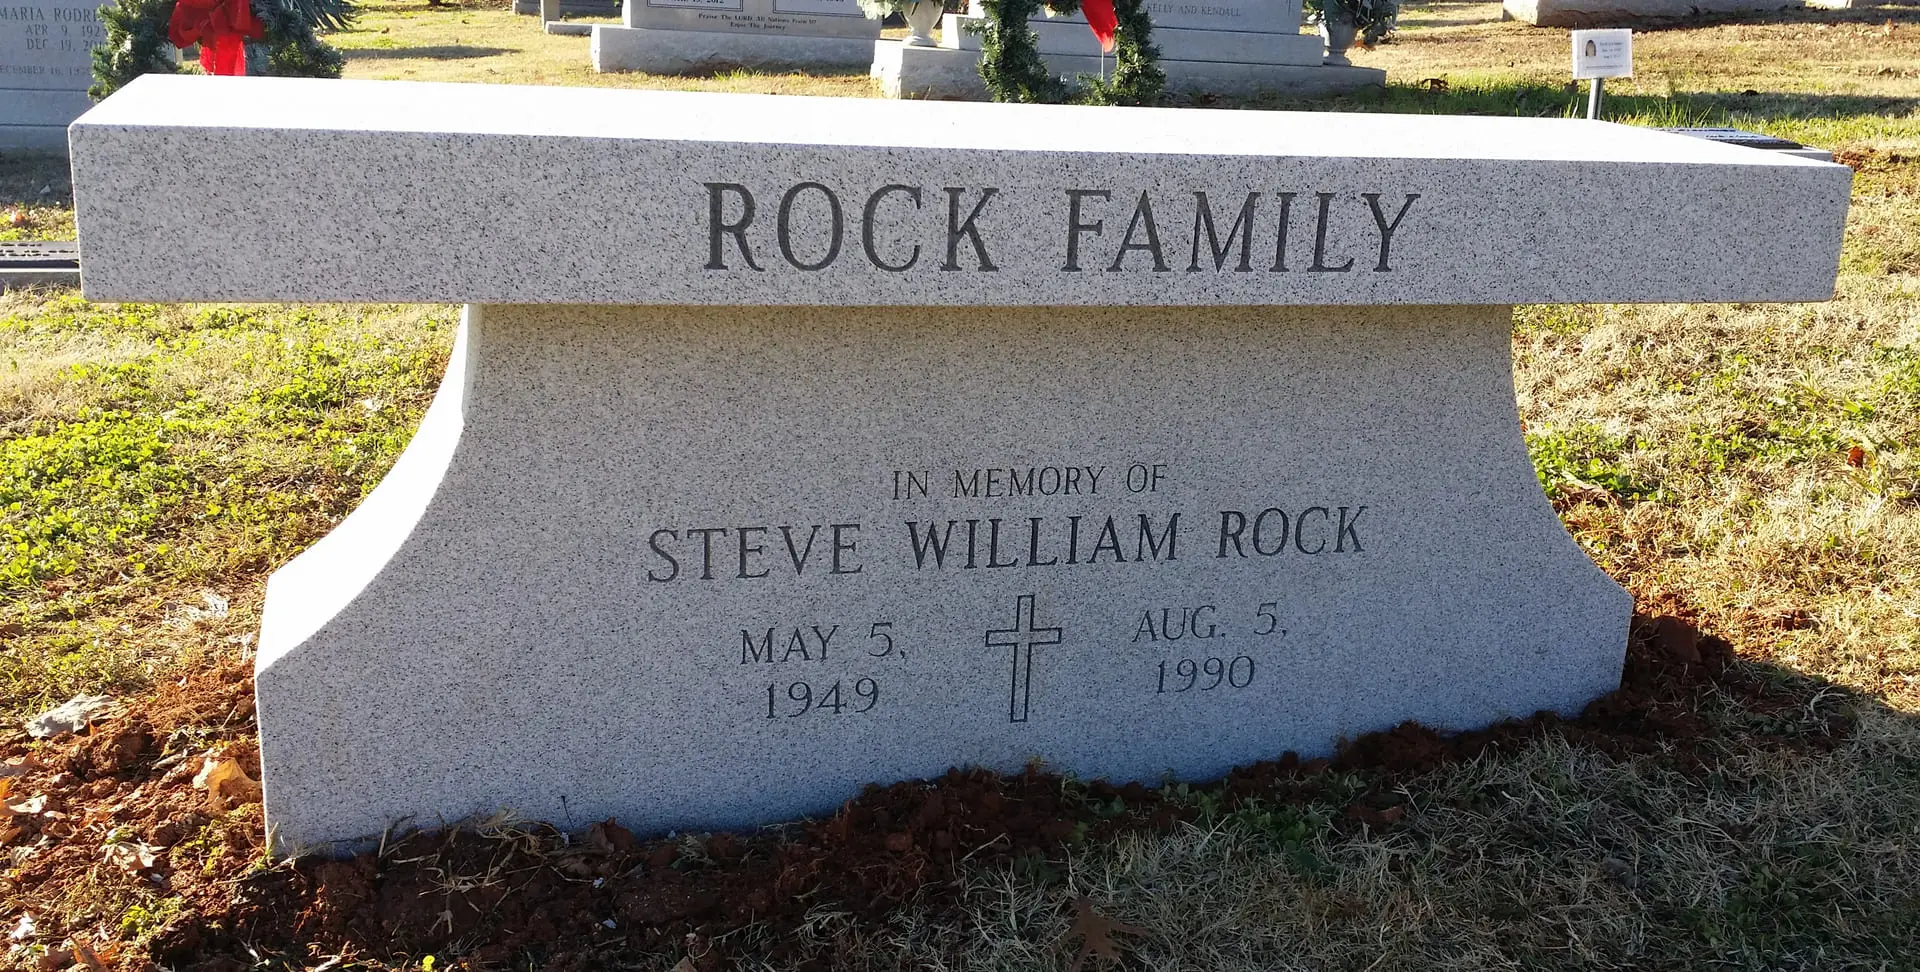 A memorial slab with the name Steve William Rock